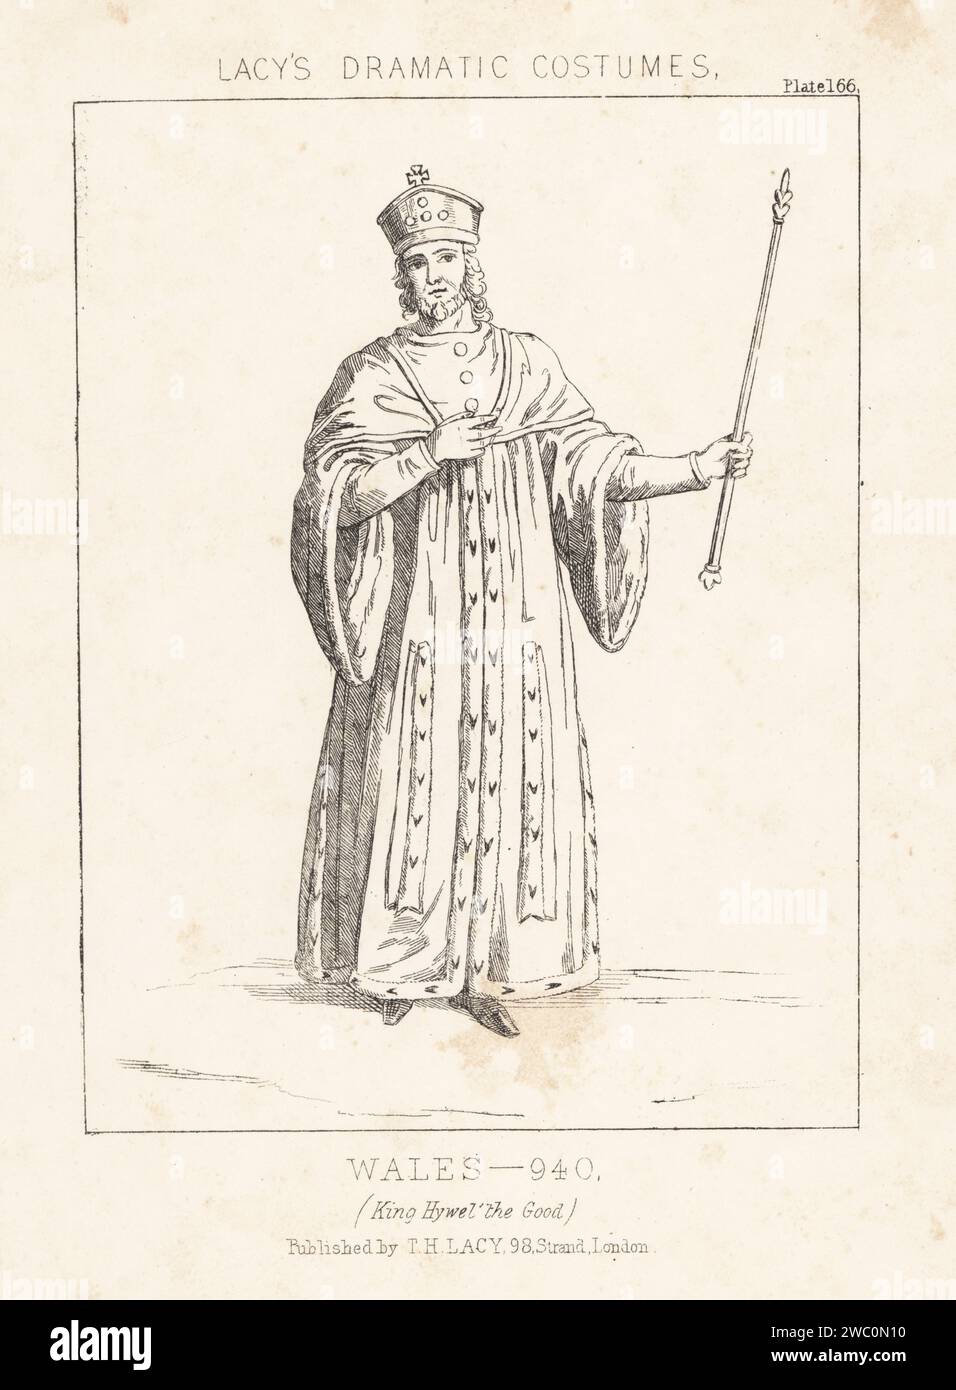 Hywel ap Cadell, known as Hywel dda or Hywel the good, King of Wales, reigned c.942-948. In crown, dalmatic lined with ermine, holding a sceptre. King Hywel the Good, Wales, 940. Lithograph after Charles Hamilton Smith from Thomas Hailes Lacy's Male Costumes, Historical, National and Dramatic in 200 Plates, London, 1865. Lacy (1809-1873) was a British actor, playwright, theatrical manager and publisher. Stock Photo